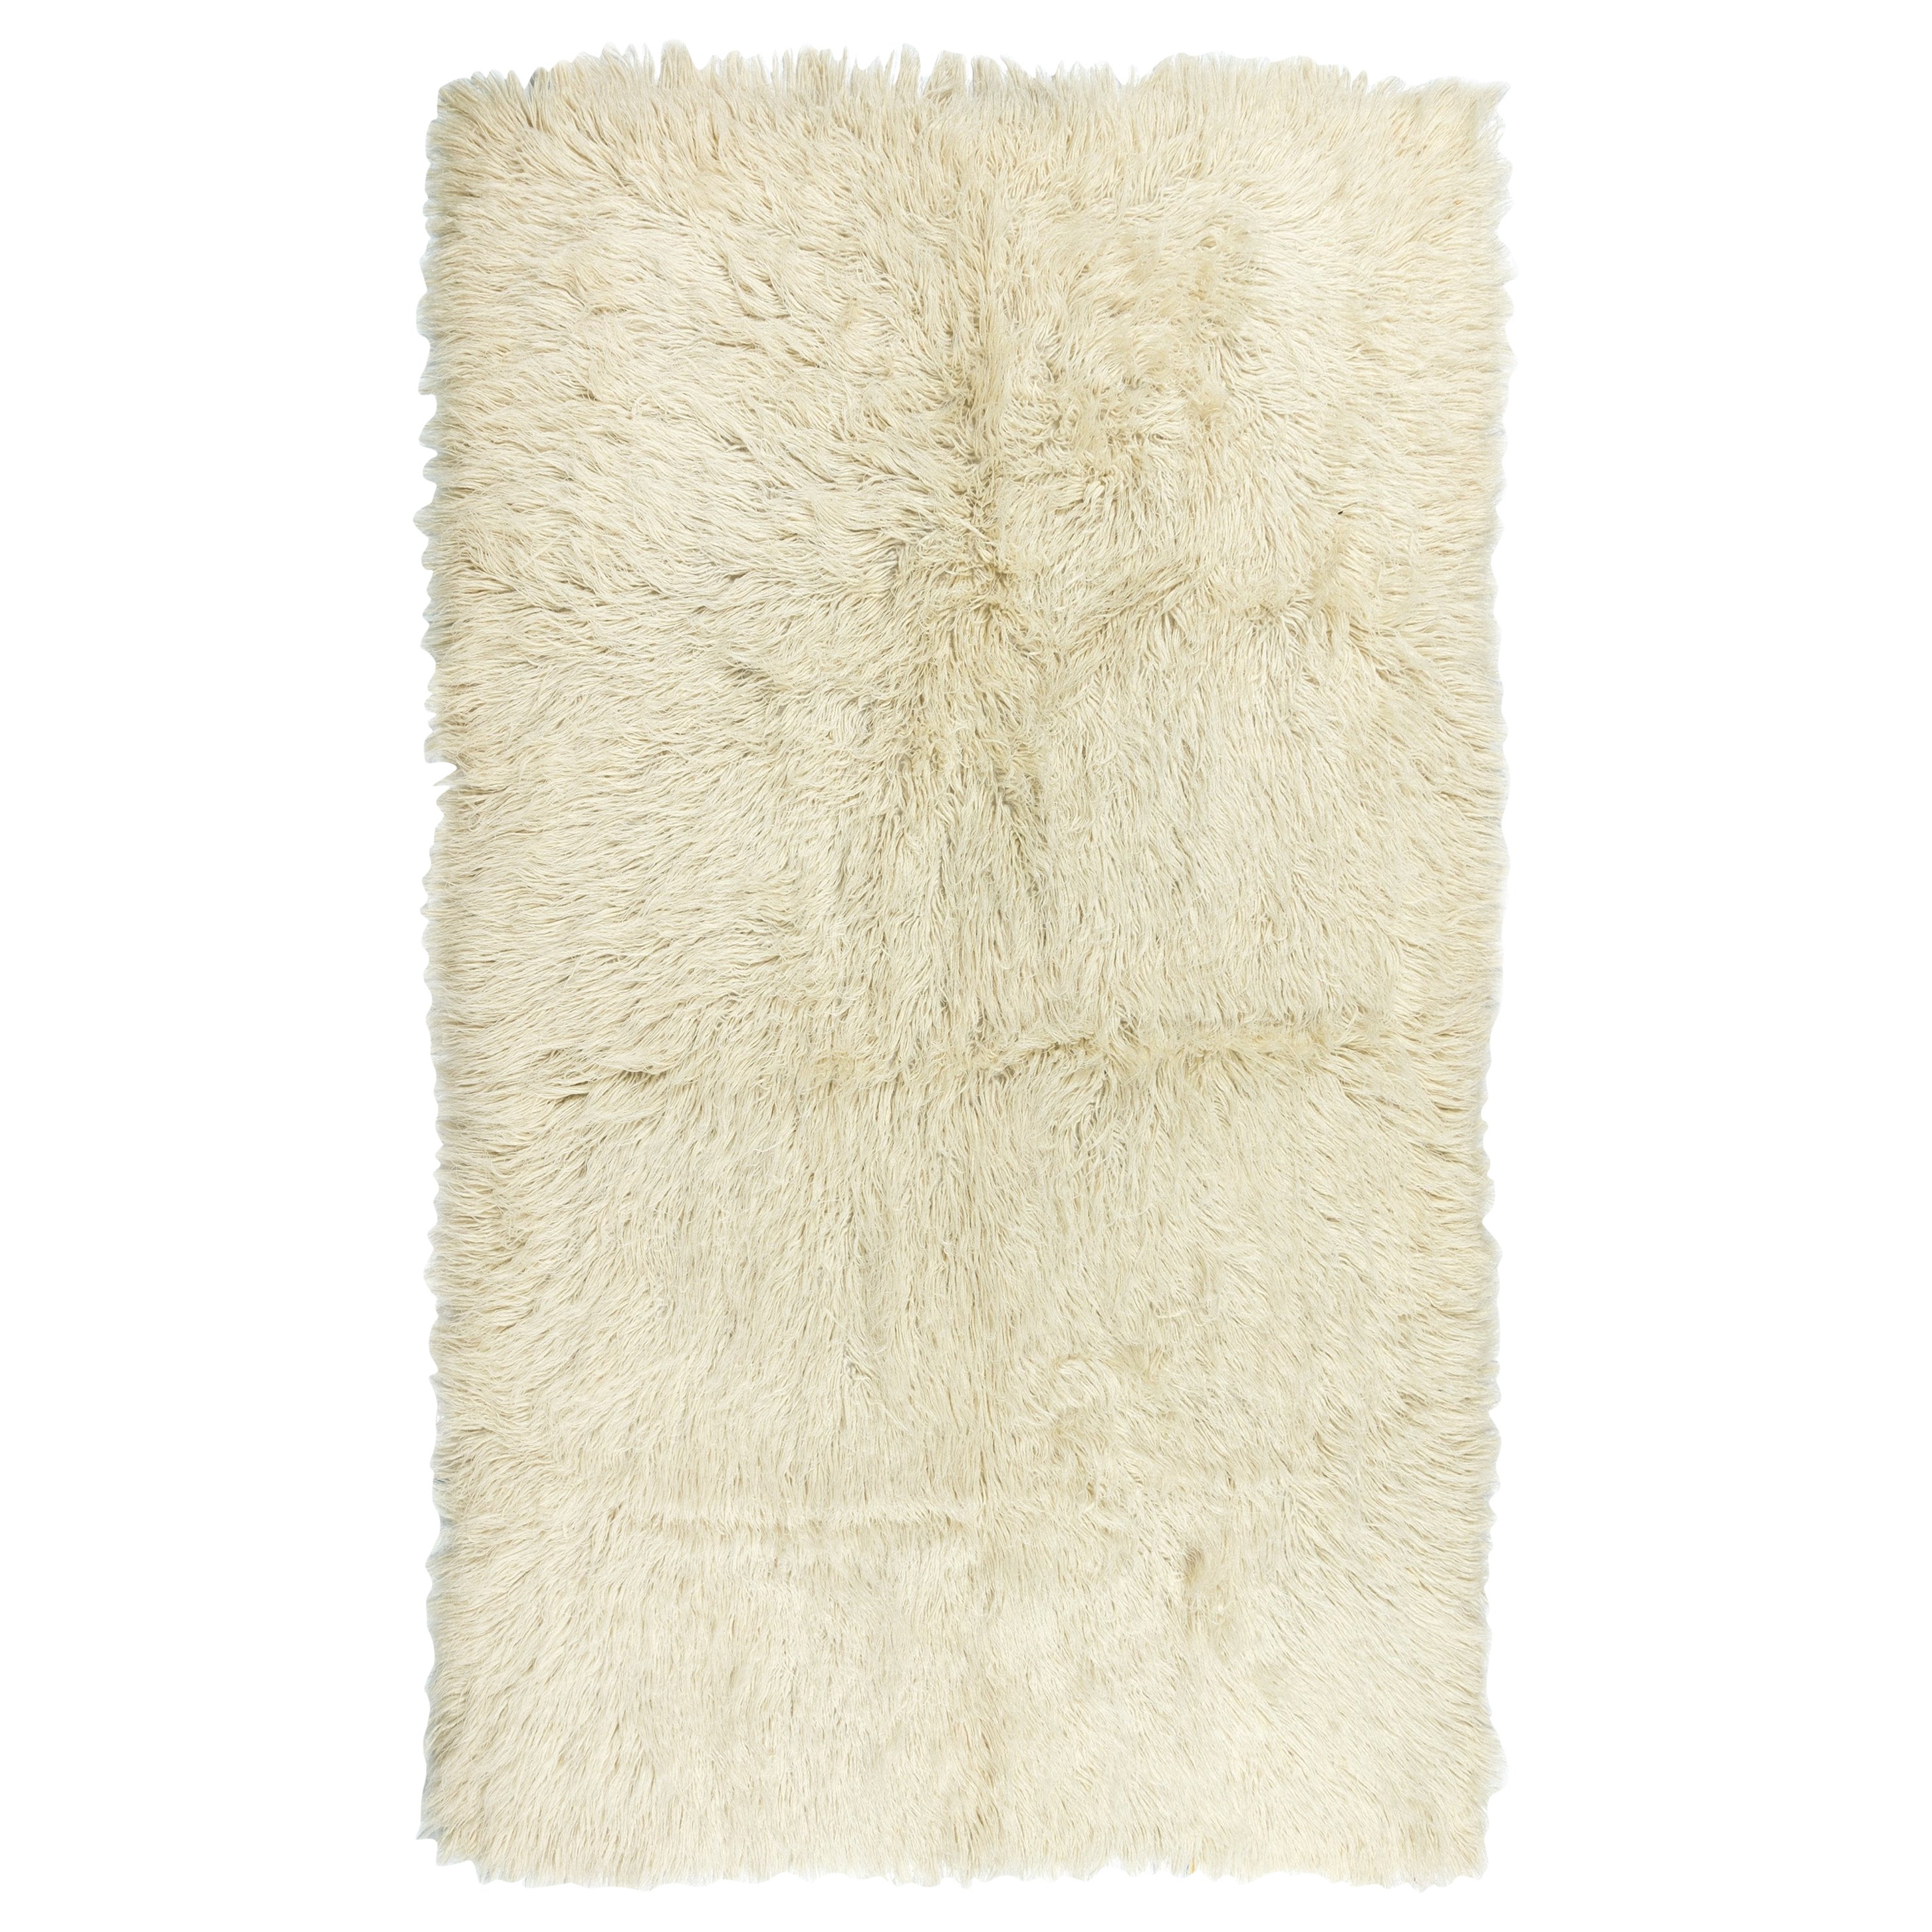 5x8.3 Ft Vintage Handmade Shaggy Accent Rug Made of Natural Mohair Wool For Sale